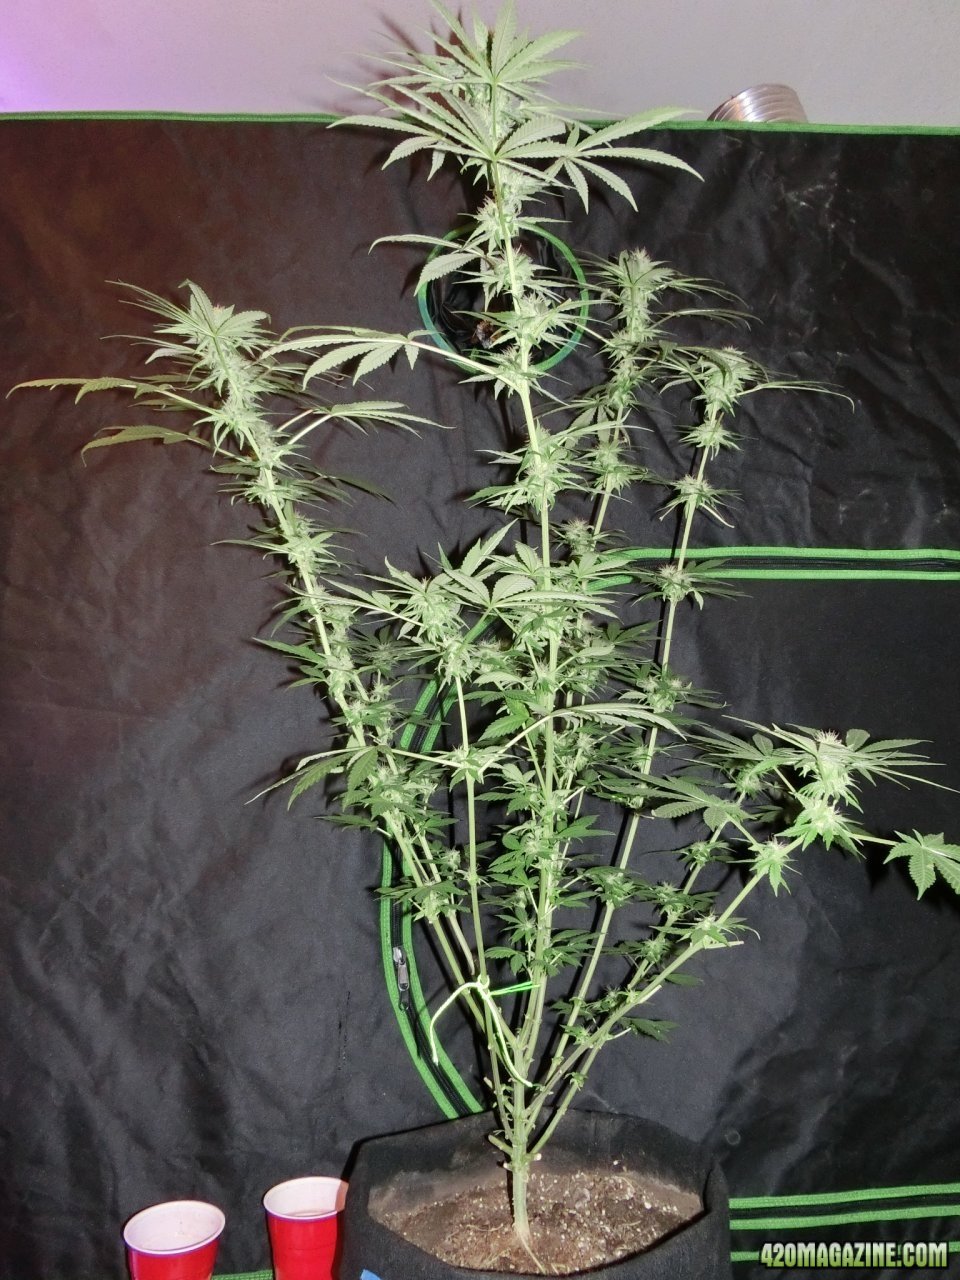 Day 84 Maui Waui Flower Day 36 - Side View